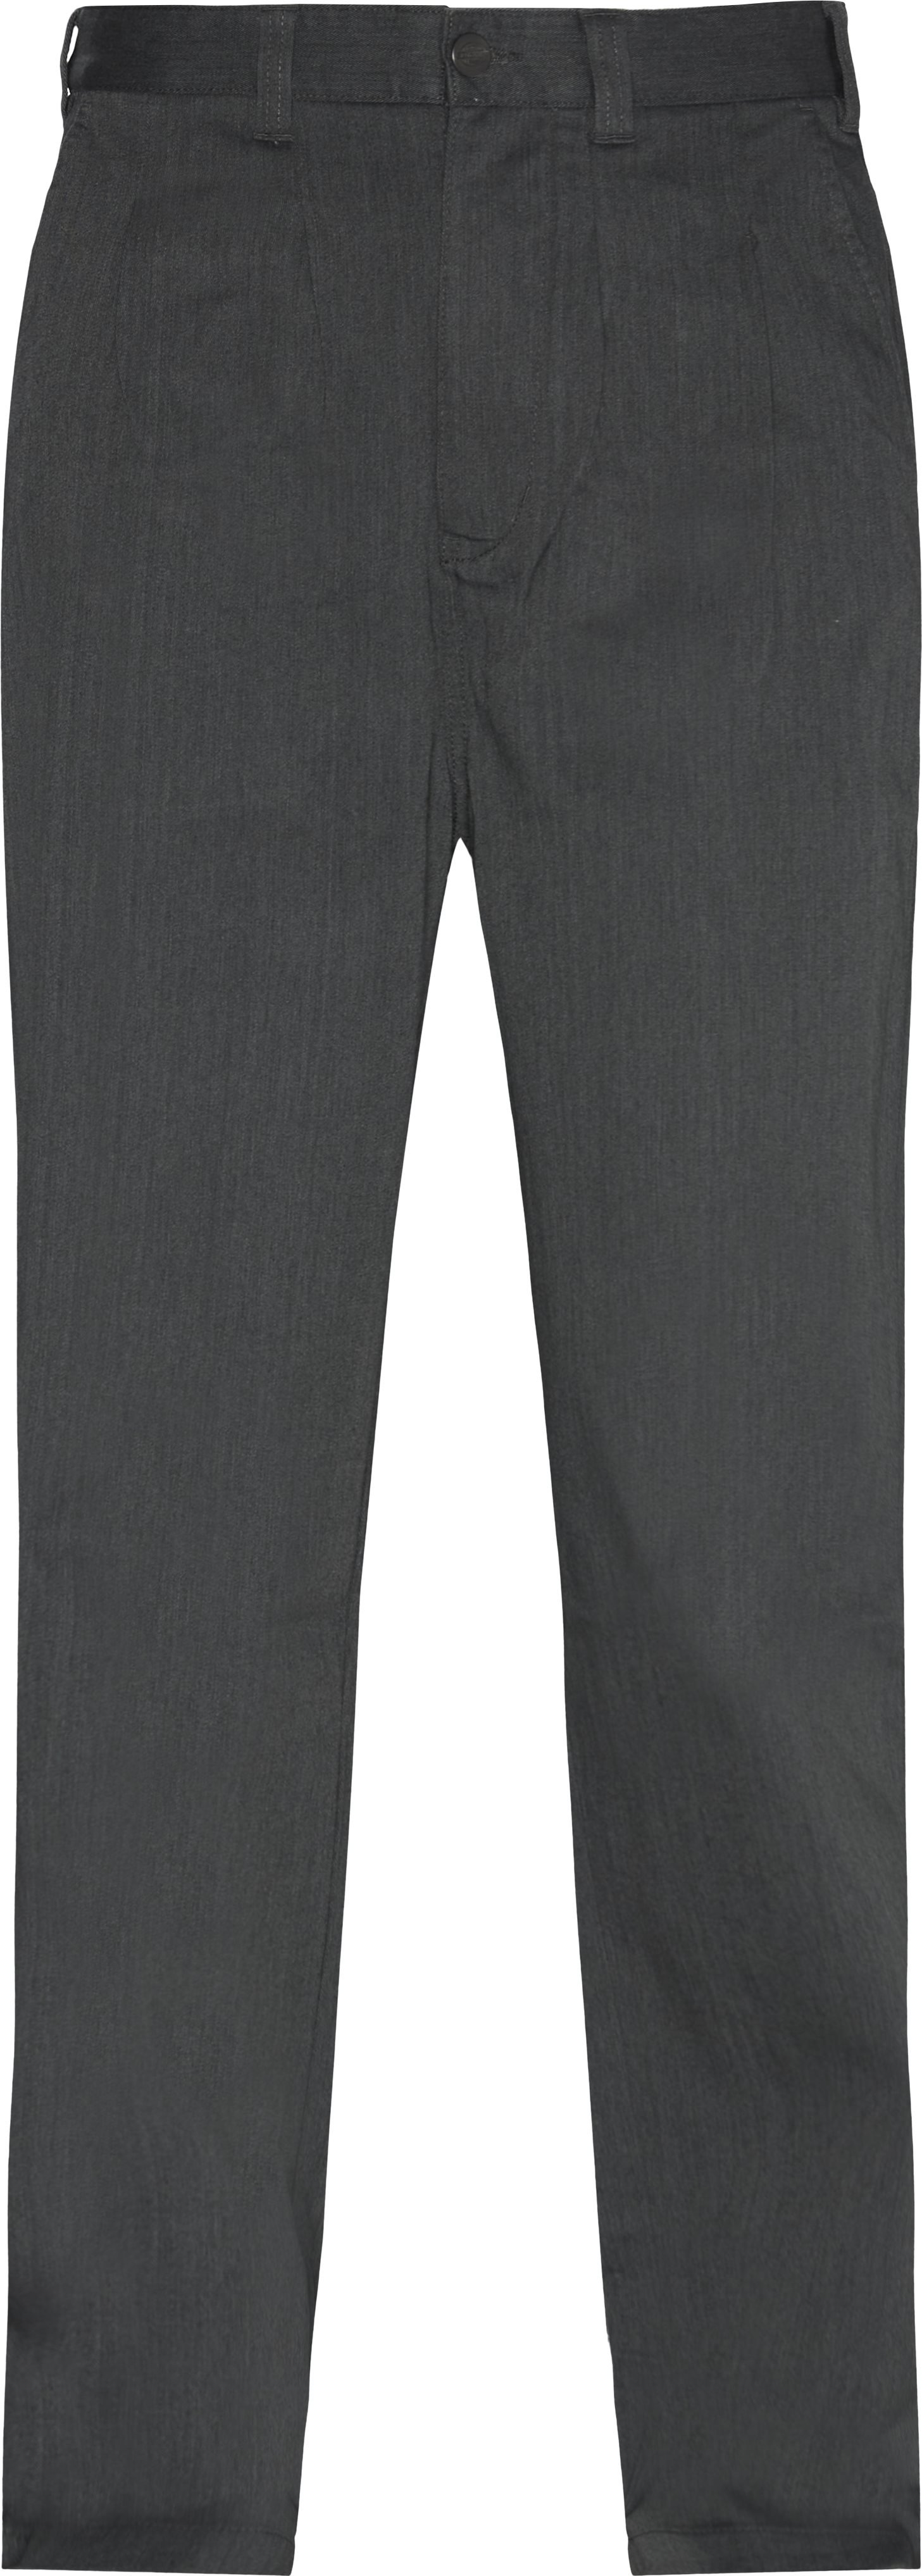 Clarkston Pant - Trousers - Loose fit - Grey